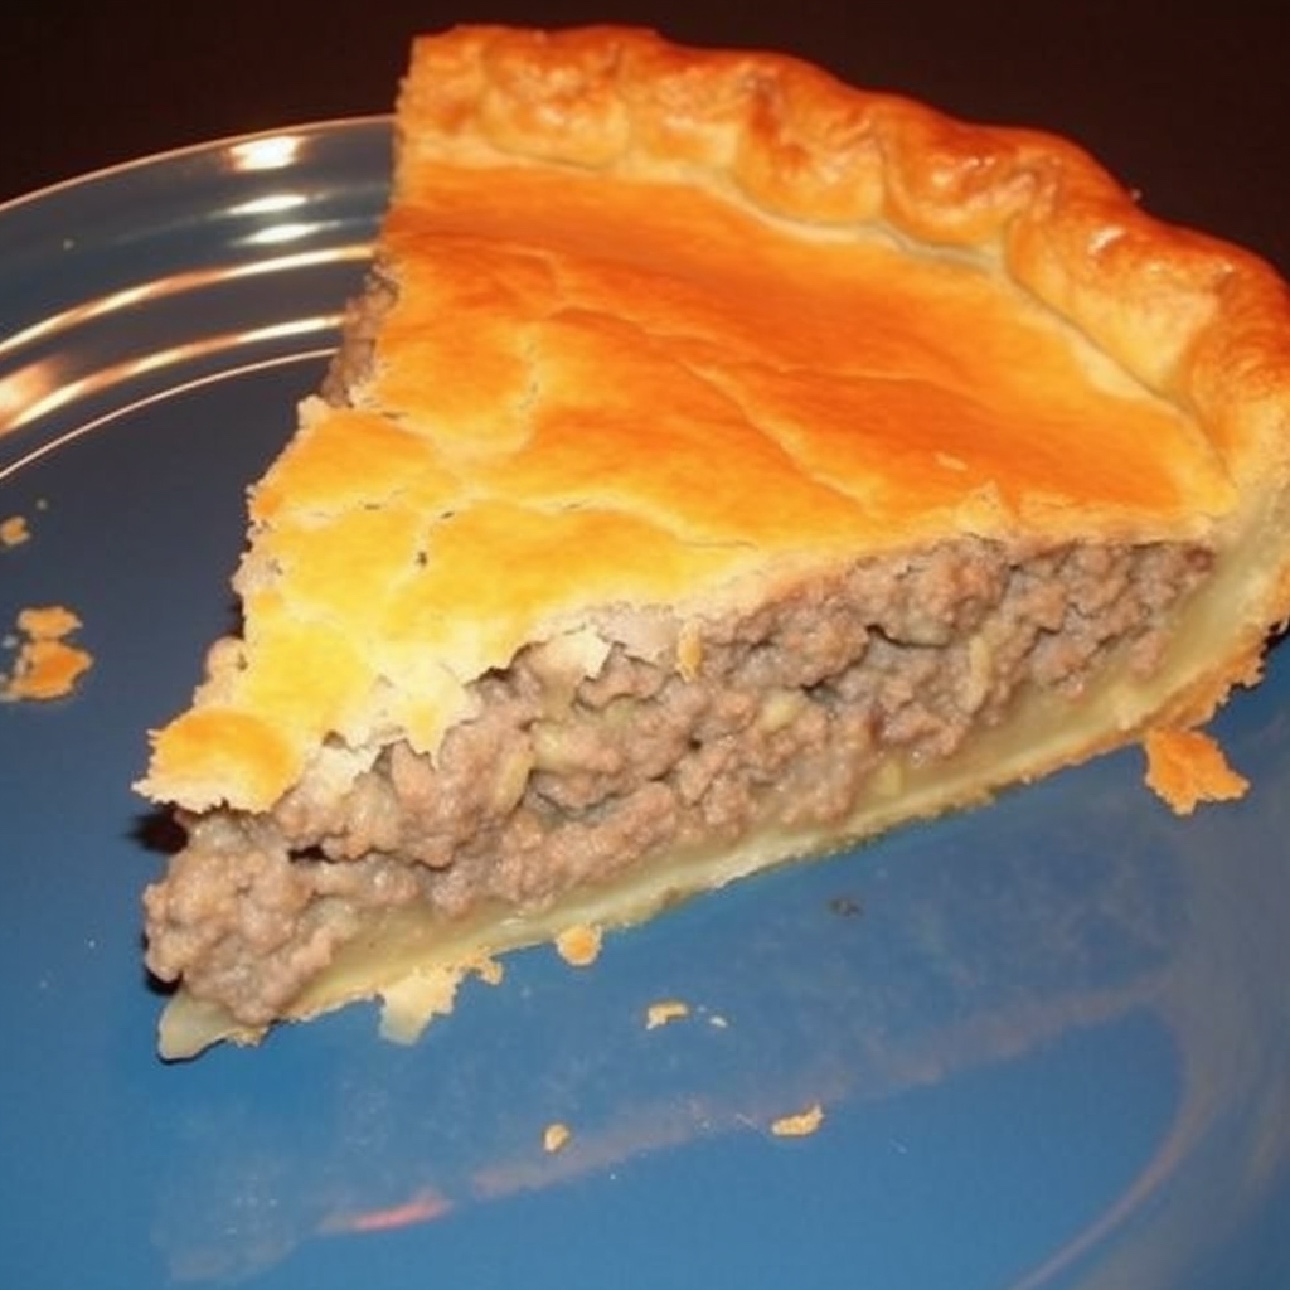 Serving a slice of savory French Meat Pie at family dinner